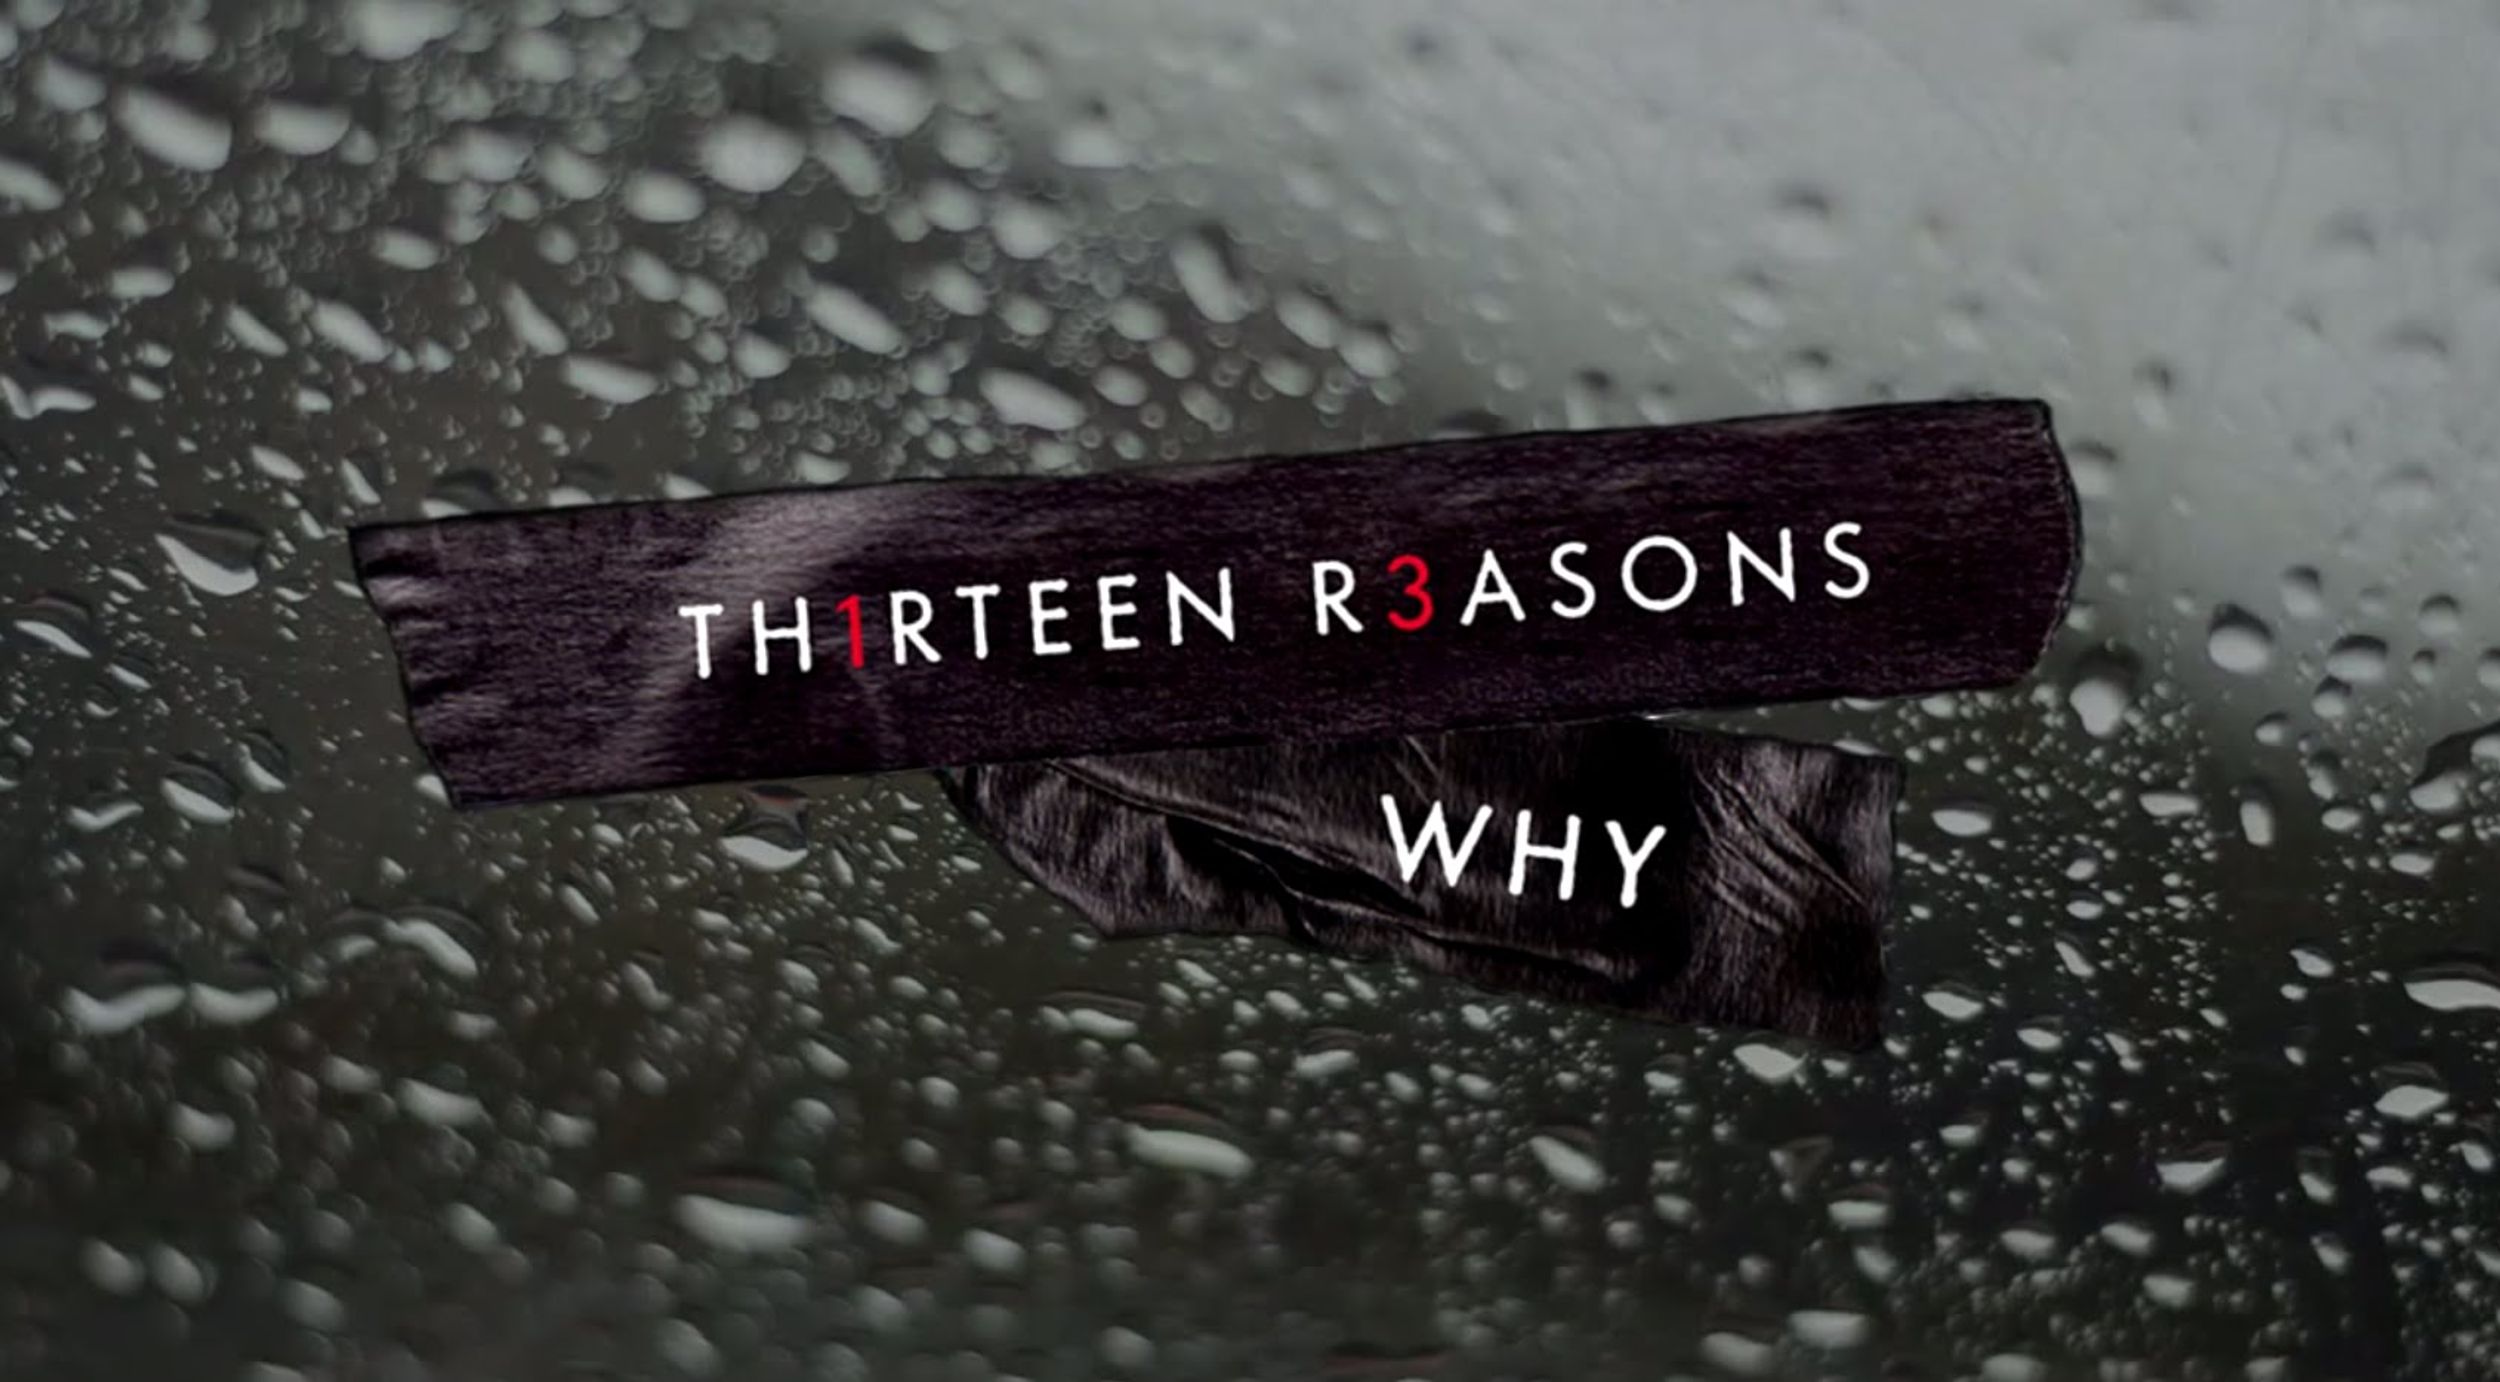 Why "13 Reasons Why" Should Not Have a Second Season